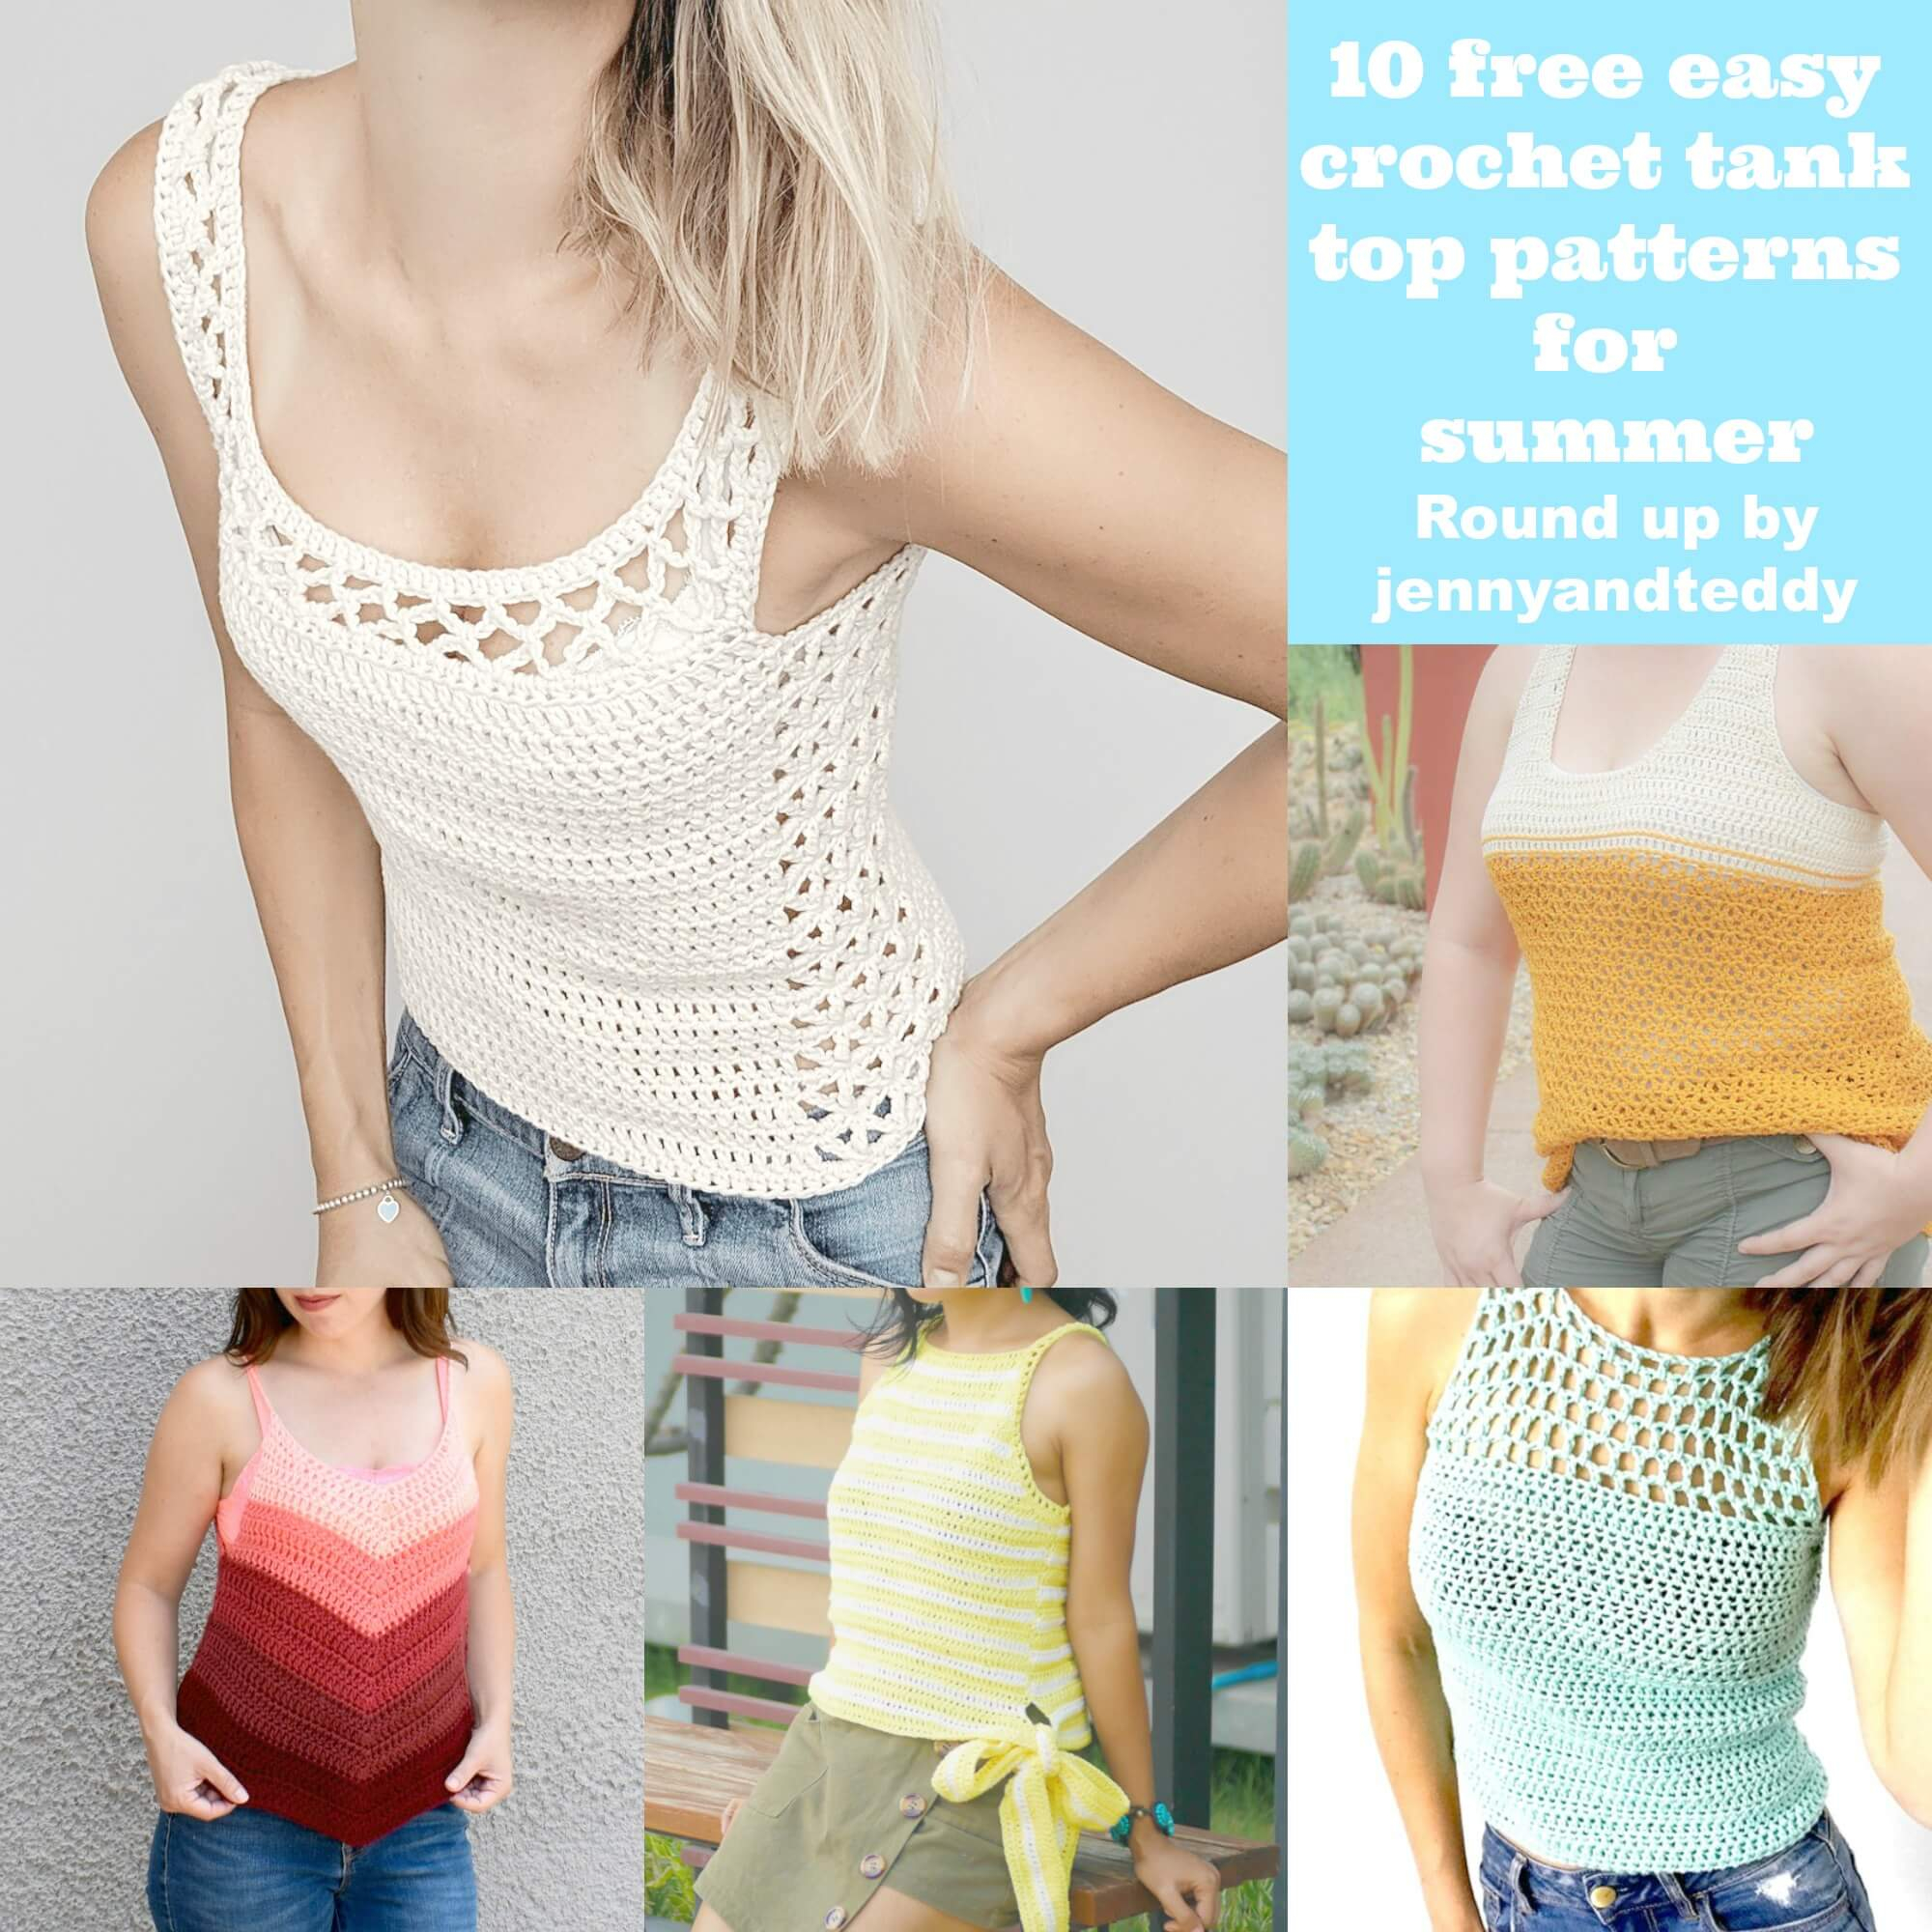 Knitted Tank Top Patterns 10 Free Easy Crochet Tank Top Patterns For Summer